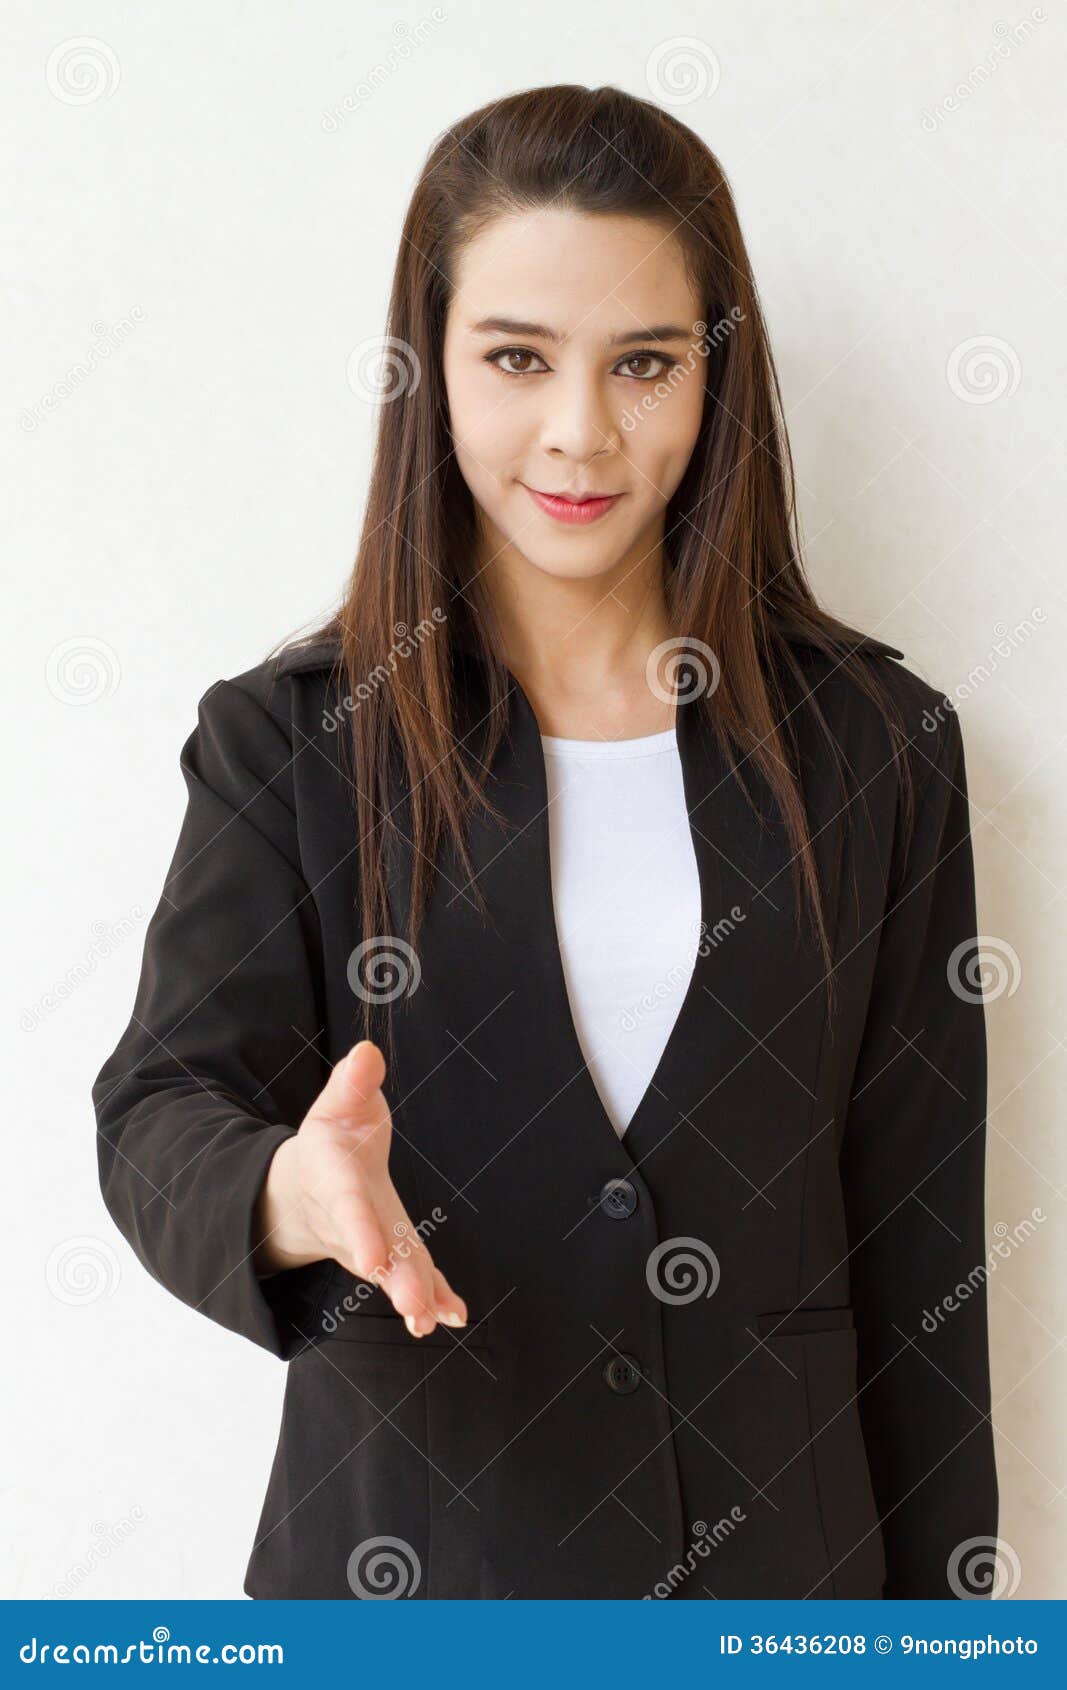 business woman offering greeting with hand shake